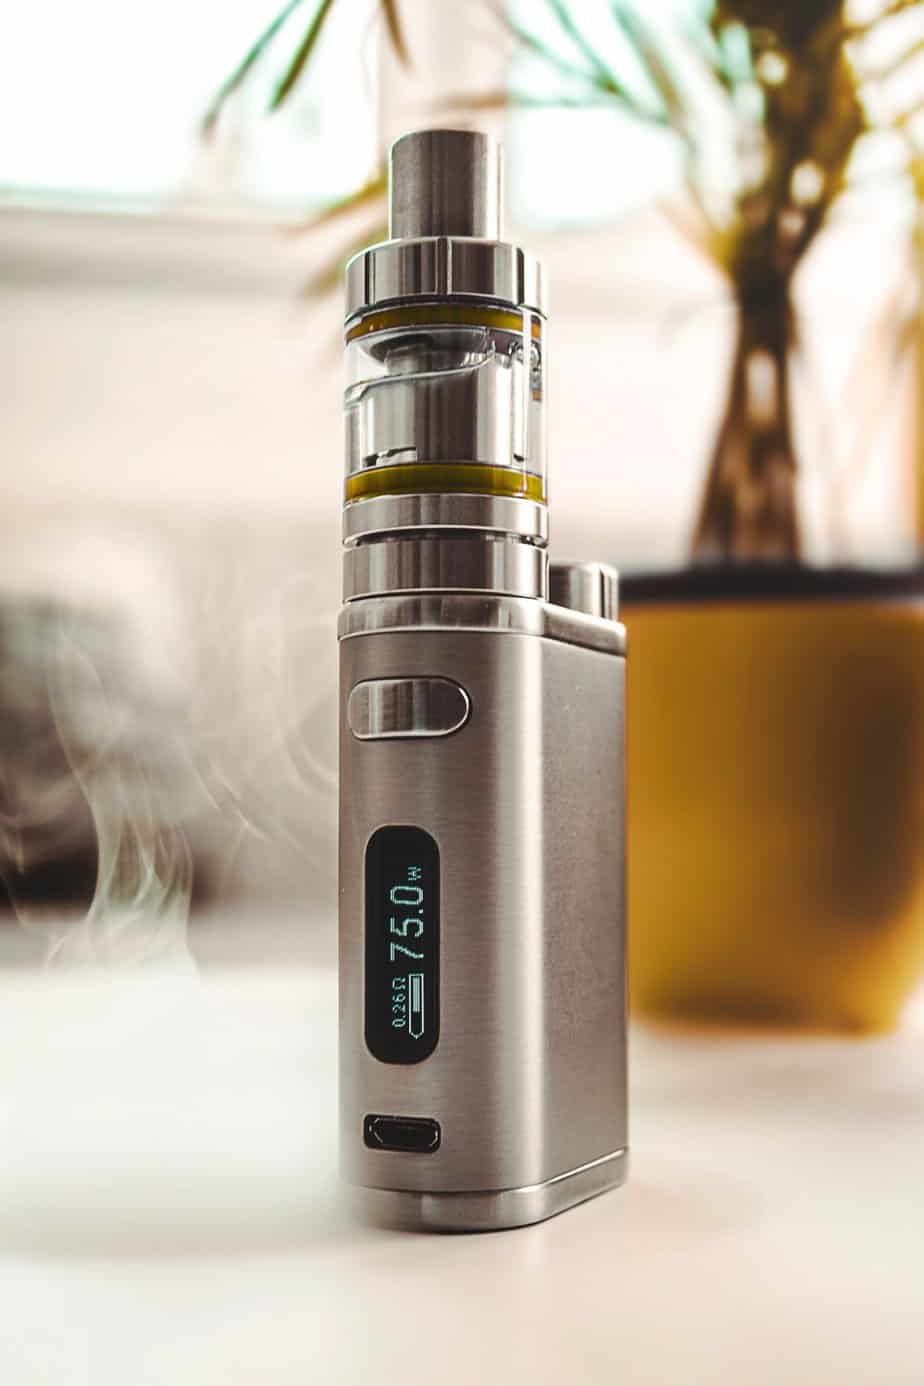 How to choose the right advanced vape kit for you